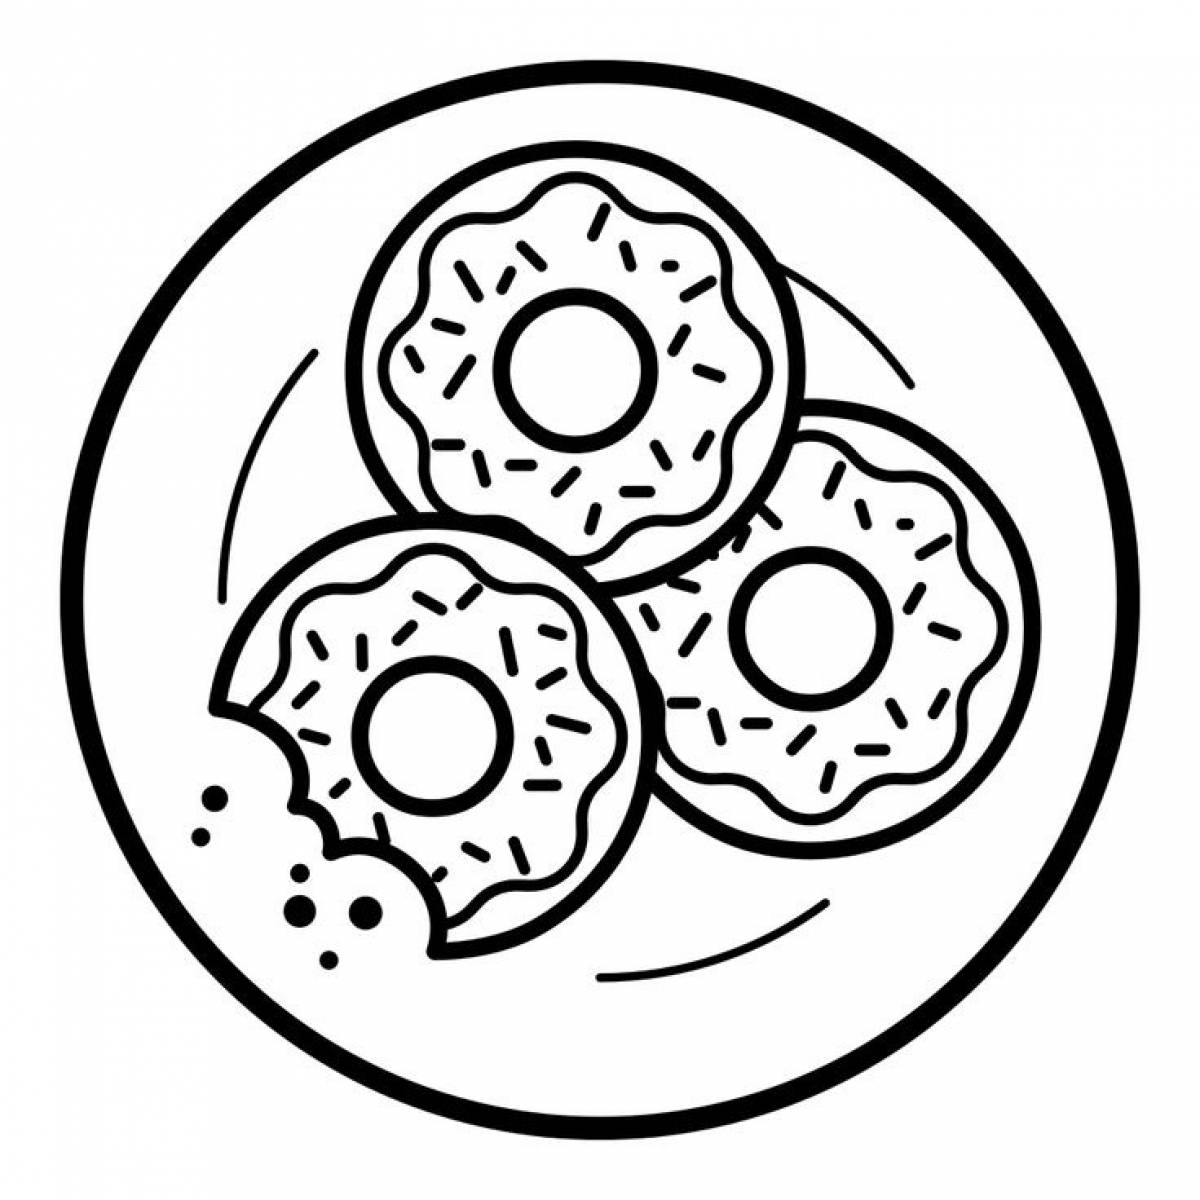 Donut on a plate